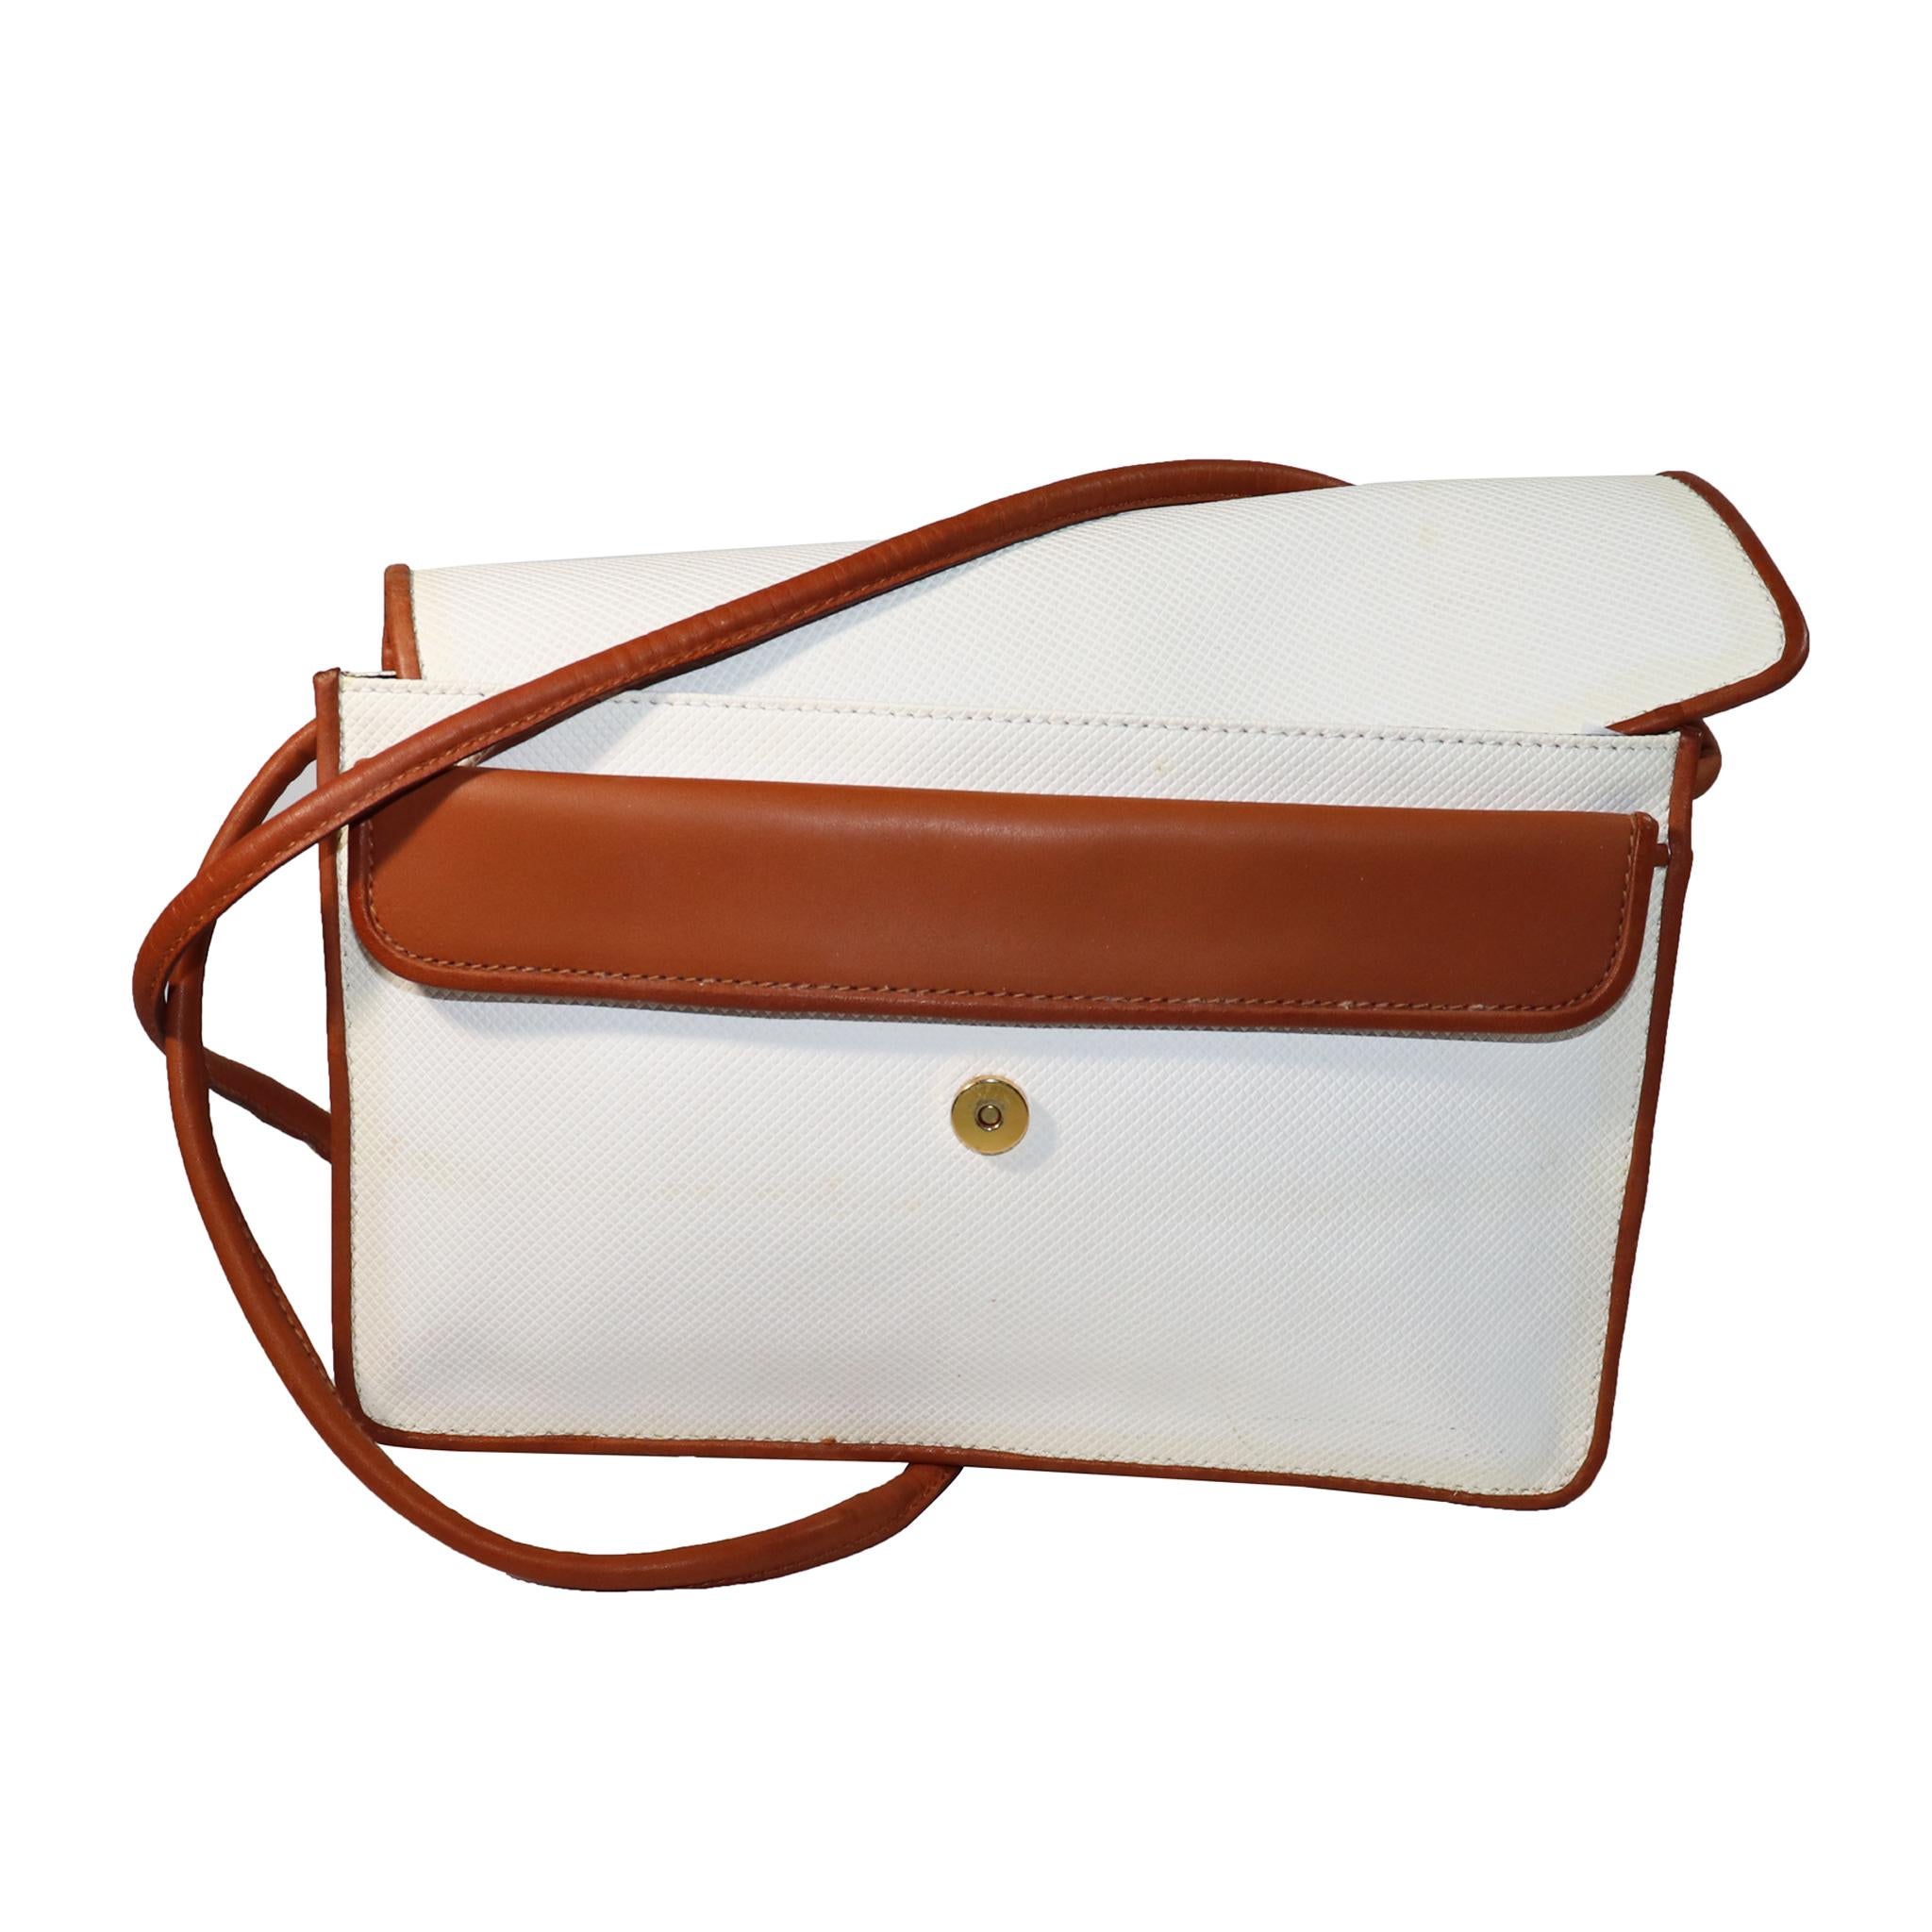 Bottega Veneta White Crossbody w/ Tan Accent and Strap 

Measurements:

Height - 7 Inches
Width - 10.4 Inches
Height with Strap - 27.5 Inches